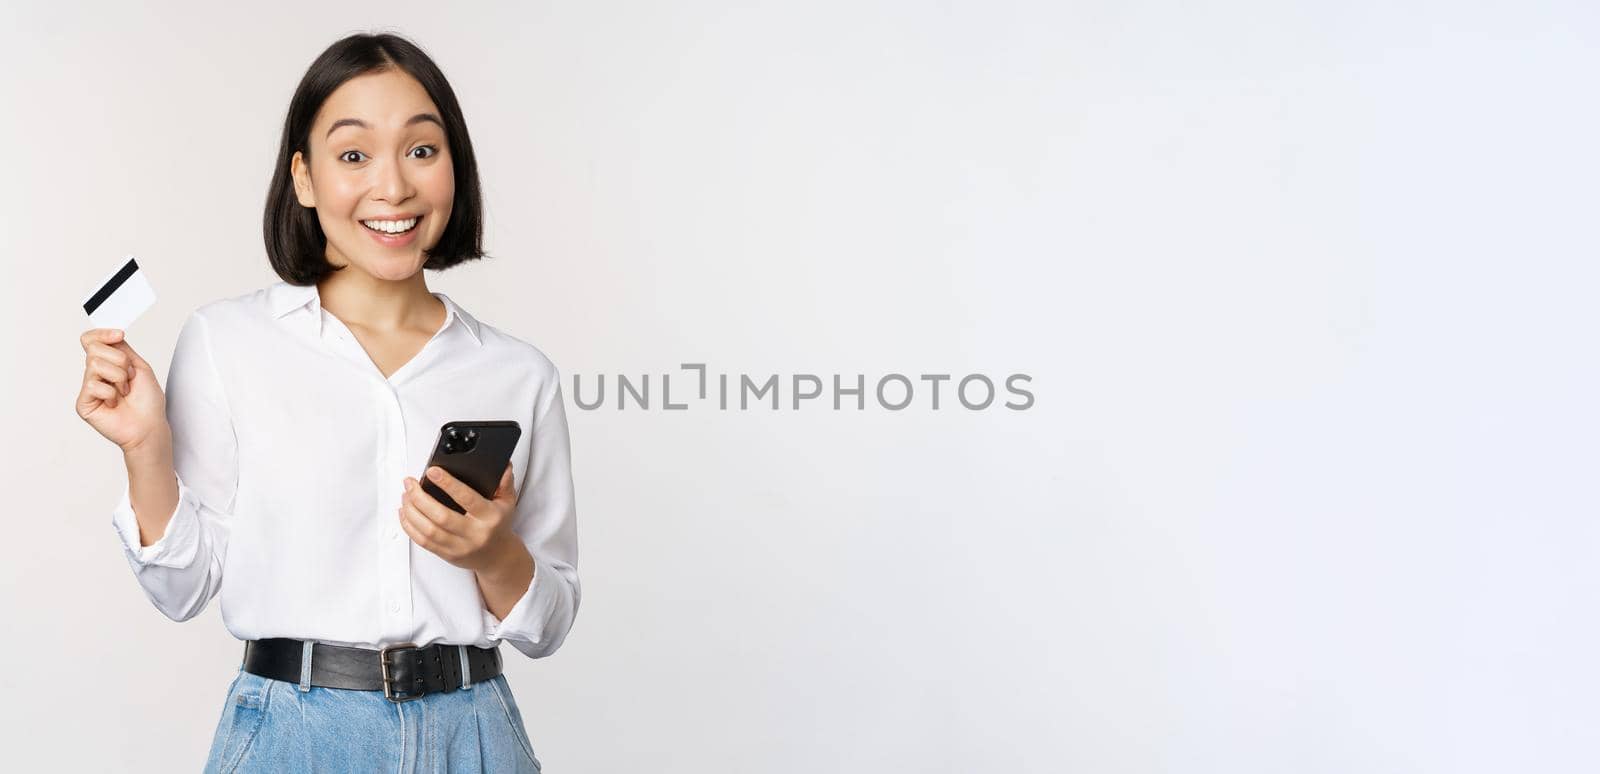 Online shopping concept. Image of young asian modern woman holding credit card and smartphone, buying with smartphone app, paying contactless, standing over white background.